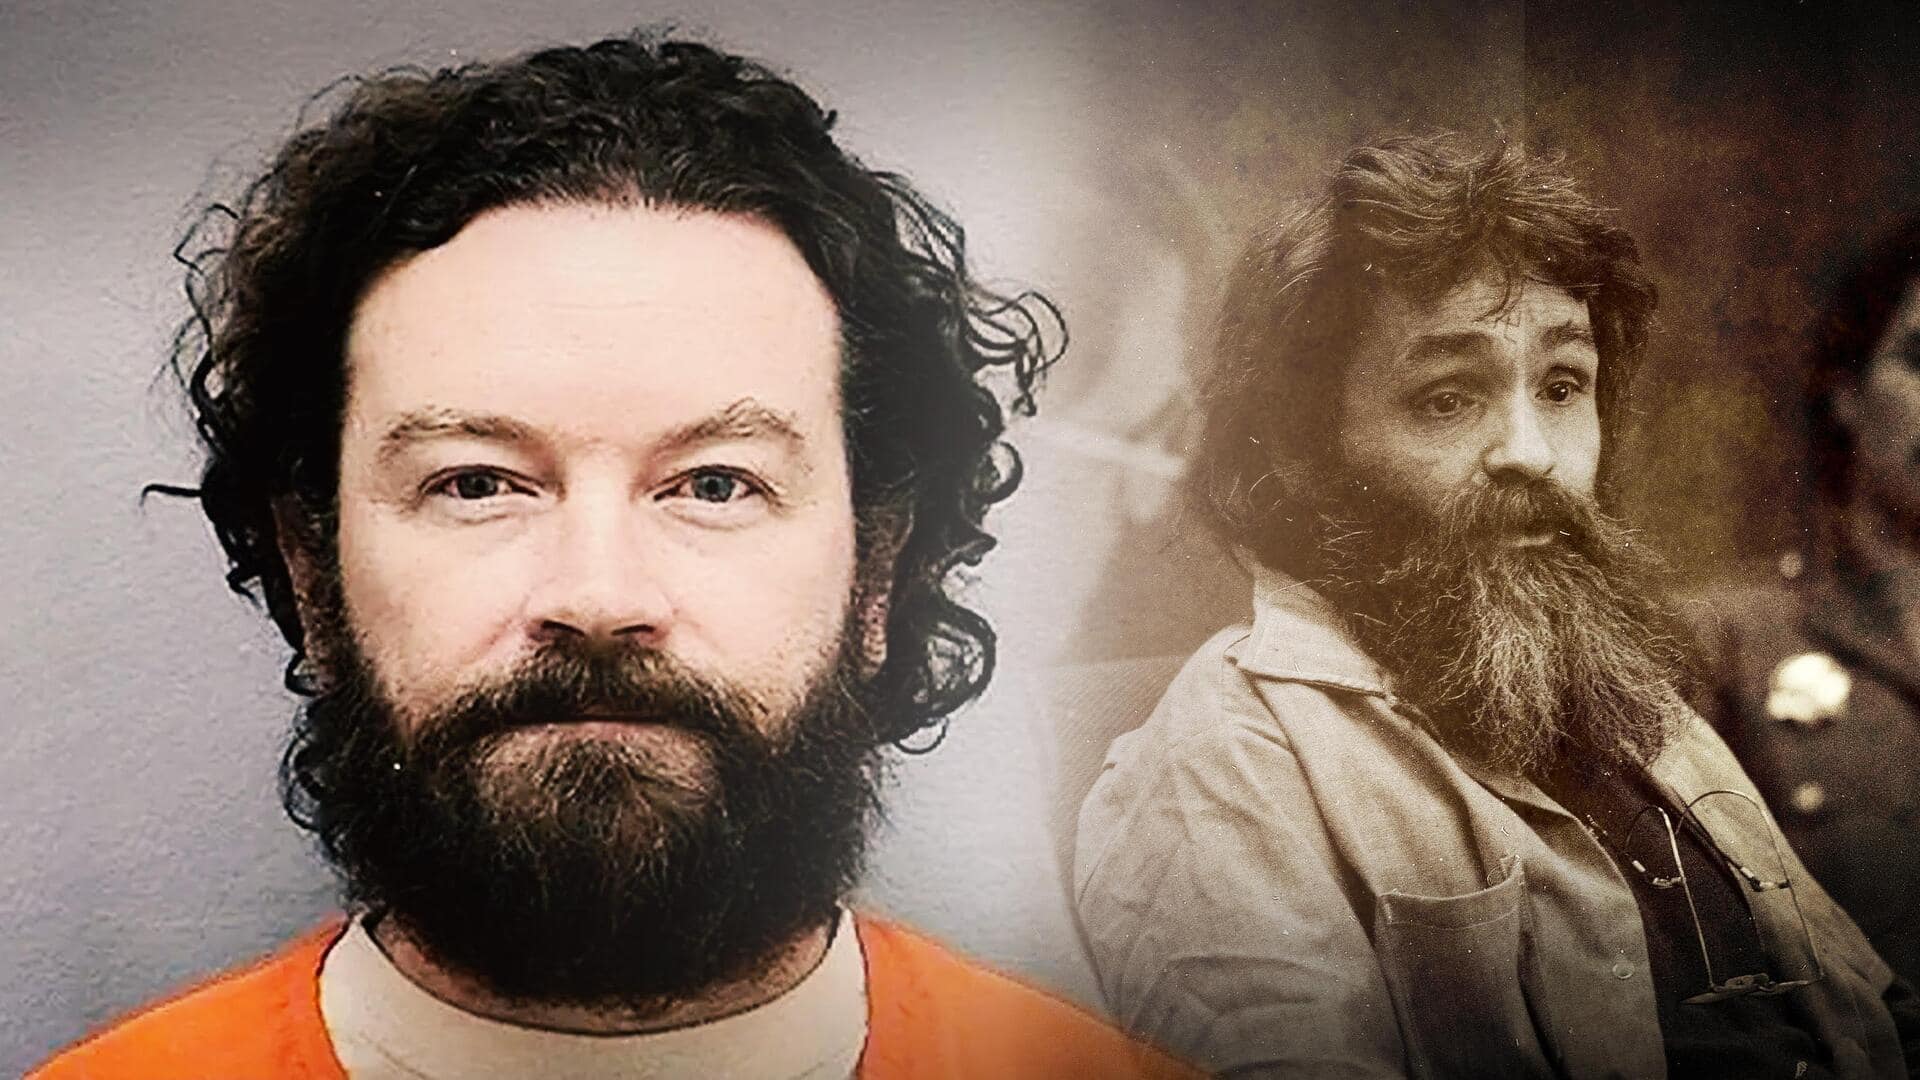 Danny Masterson transferred to Charles Manson's former maximum-security prison